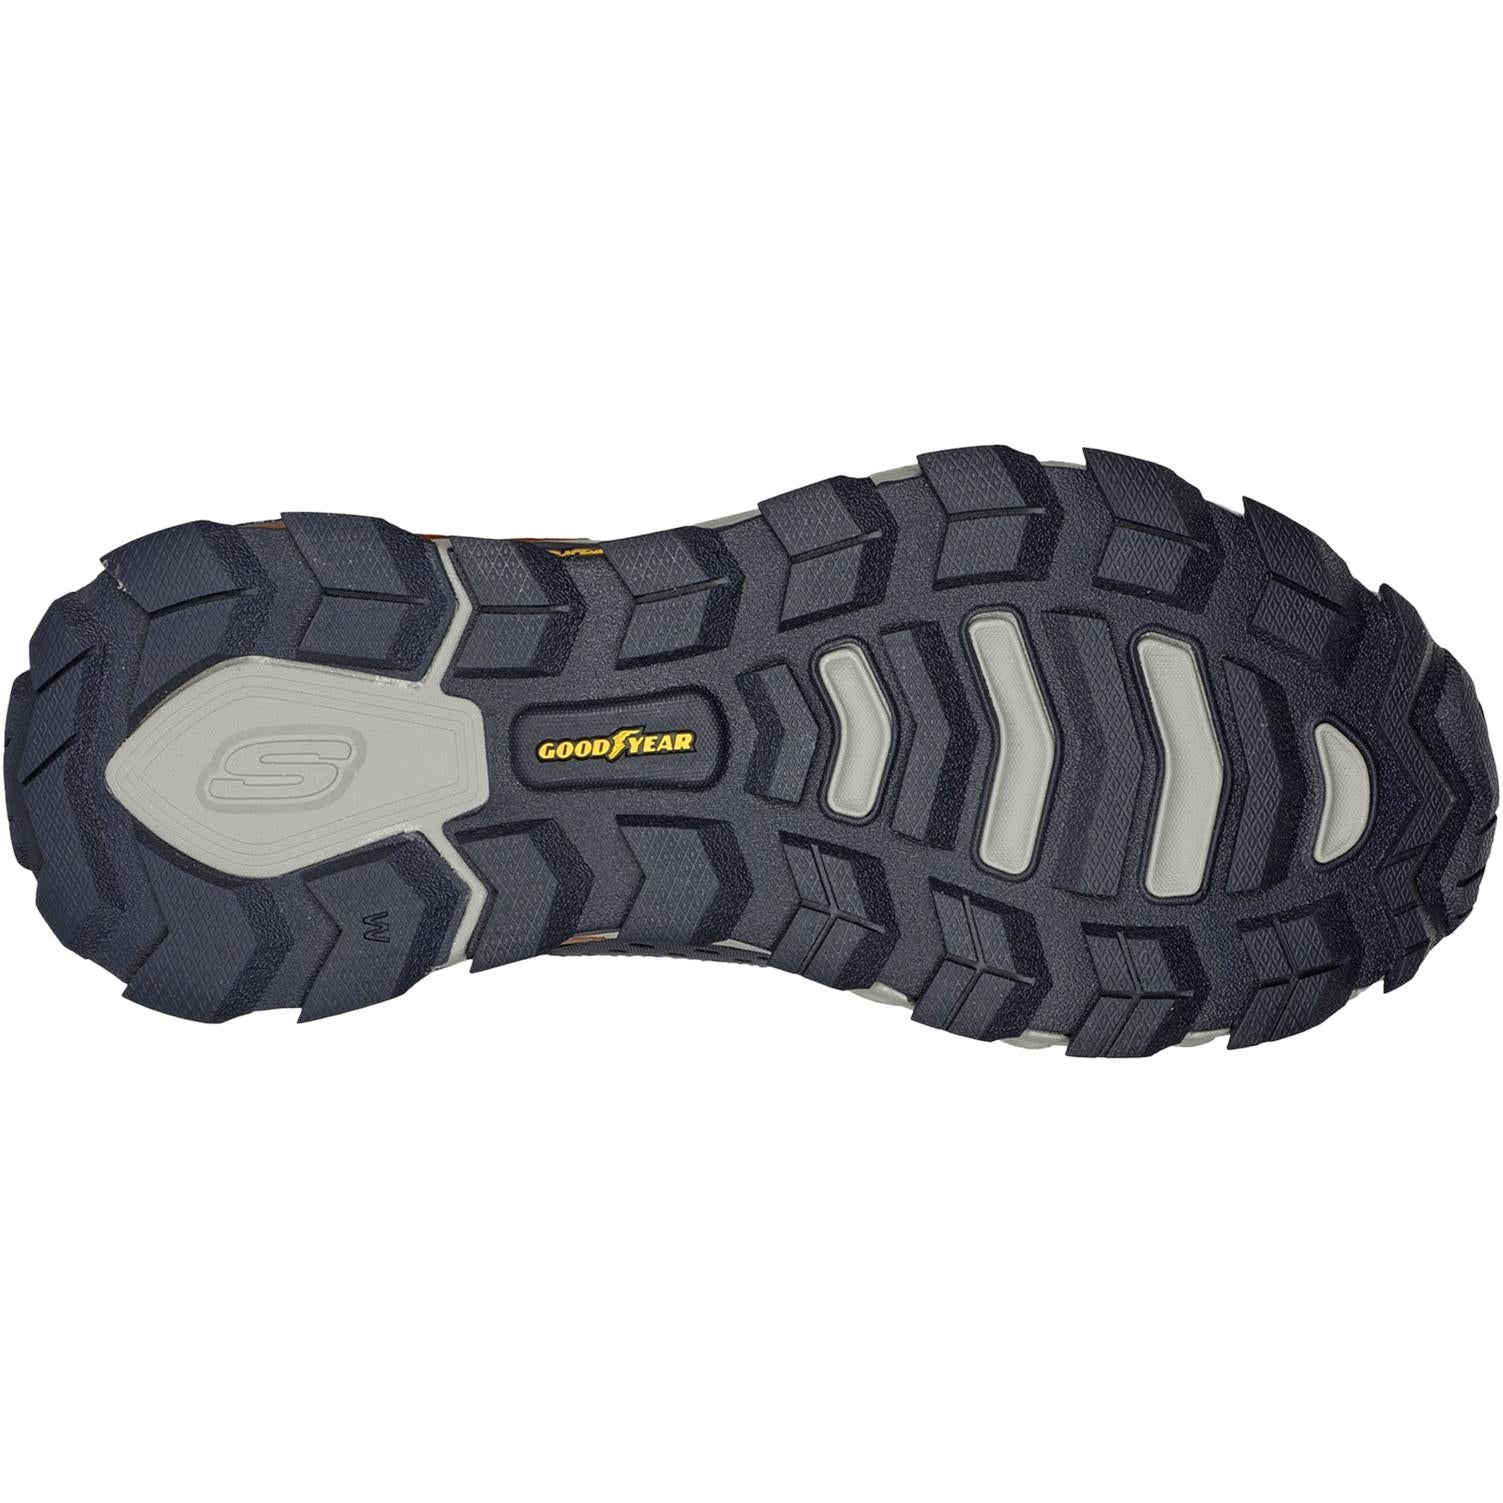 Skechers Max Protect Shoes